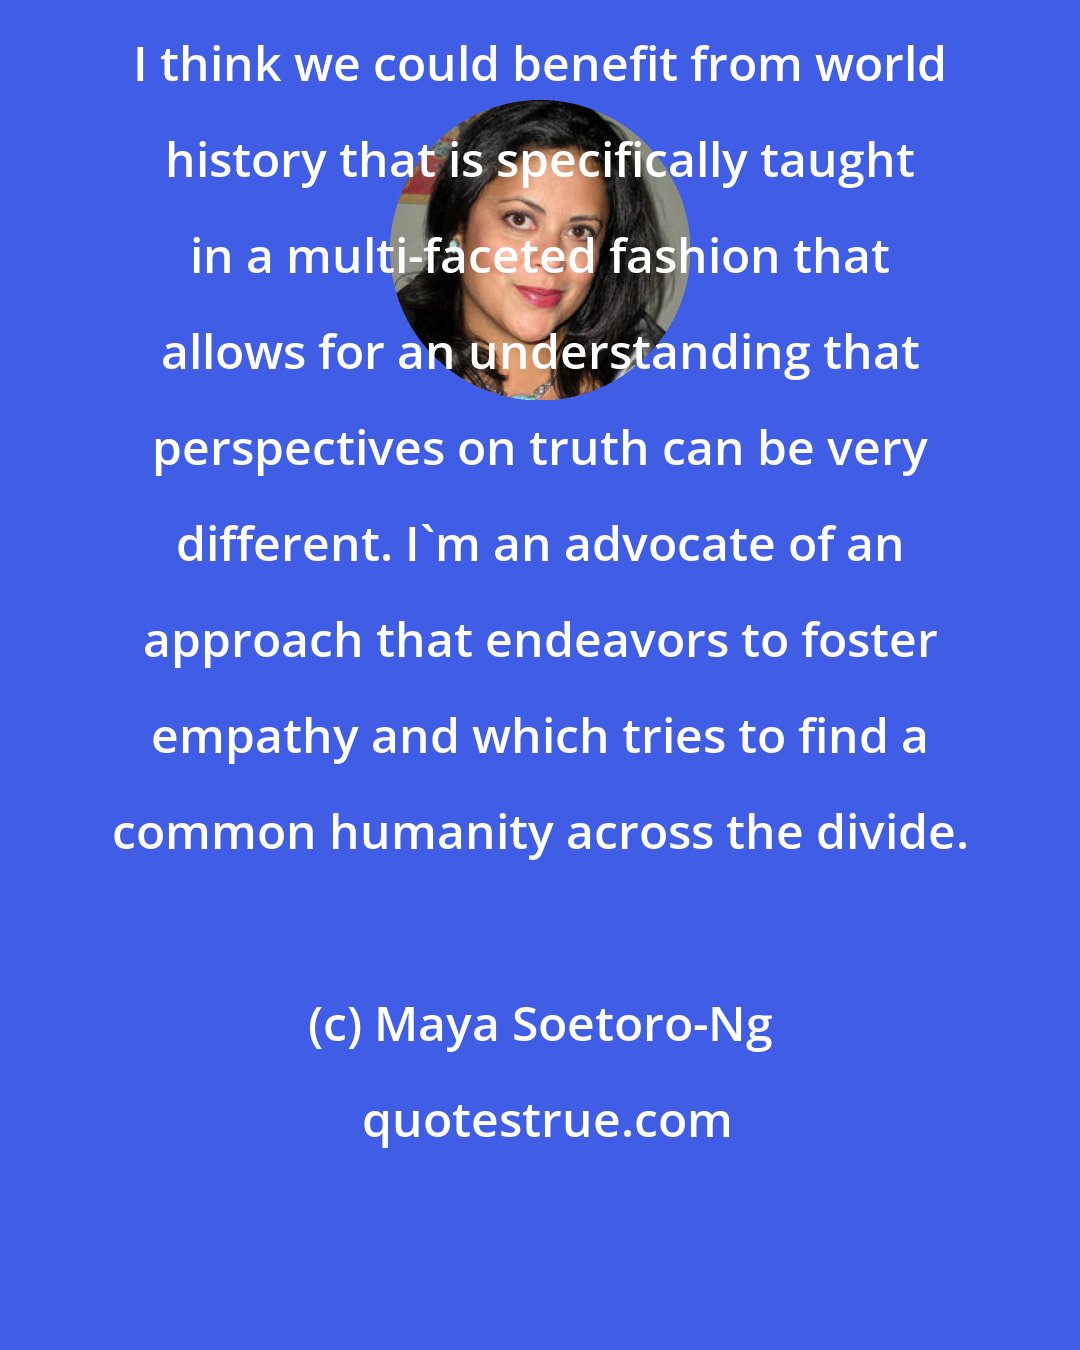 Maya Soetoro-Ng: I think we could benefit from world history that is specifically taught in a multi-faceted fashion that allows for an understanding that perspectives on truth can be very different. I'm an advocate of an approach that endeavors to foster empathy and which tries to find a common humanity across the divide.